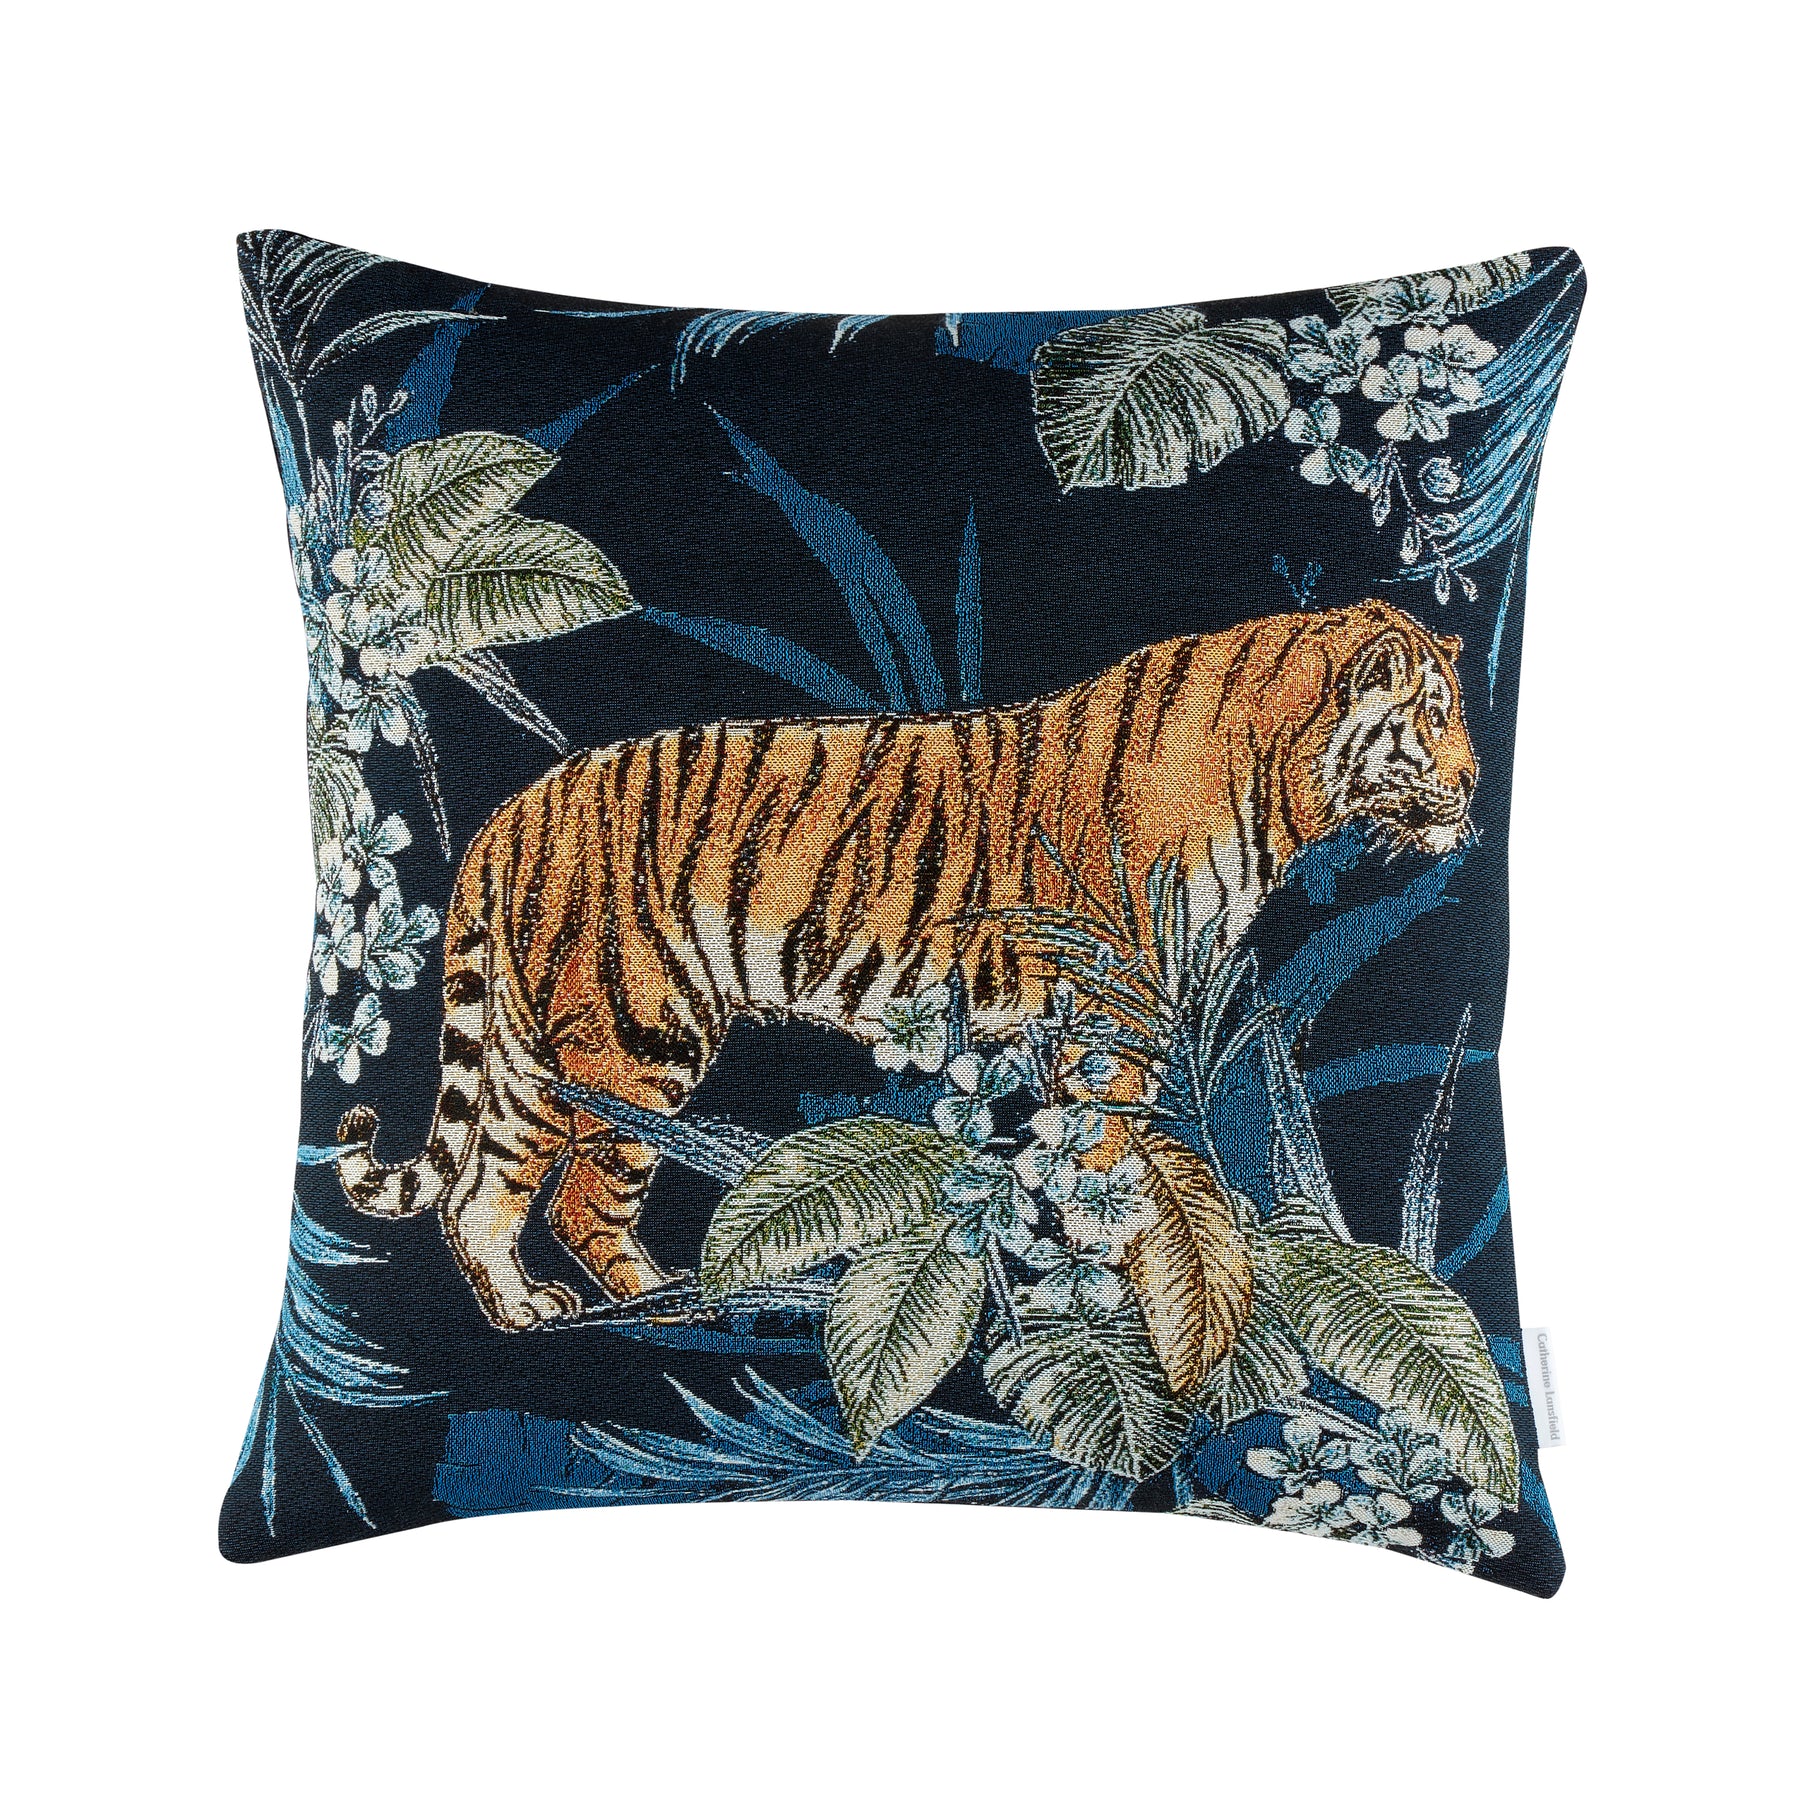 Catherine Lansfield Tiger Tropicana Filled Cushion 45cm x 45cm Navy Blue